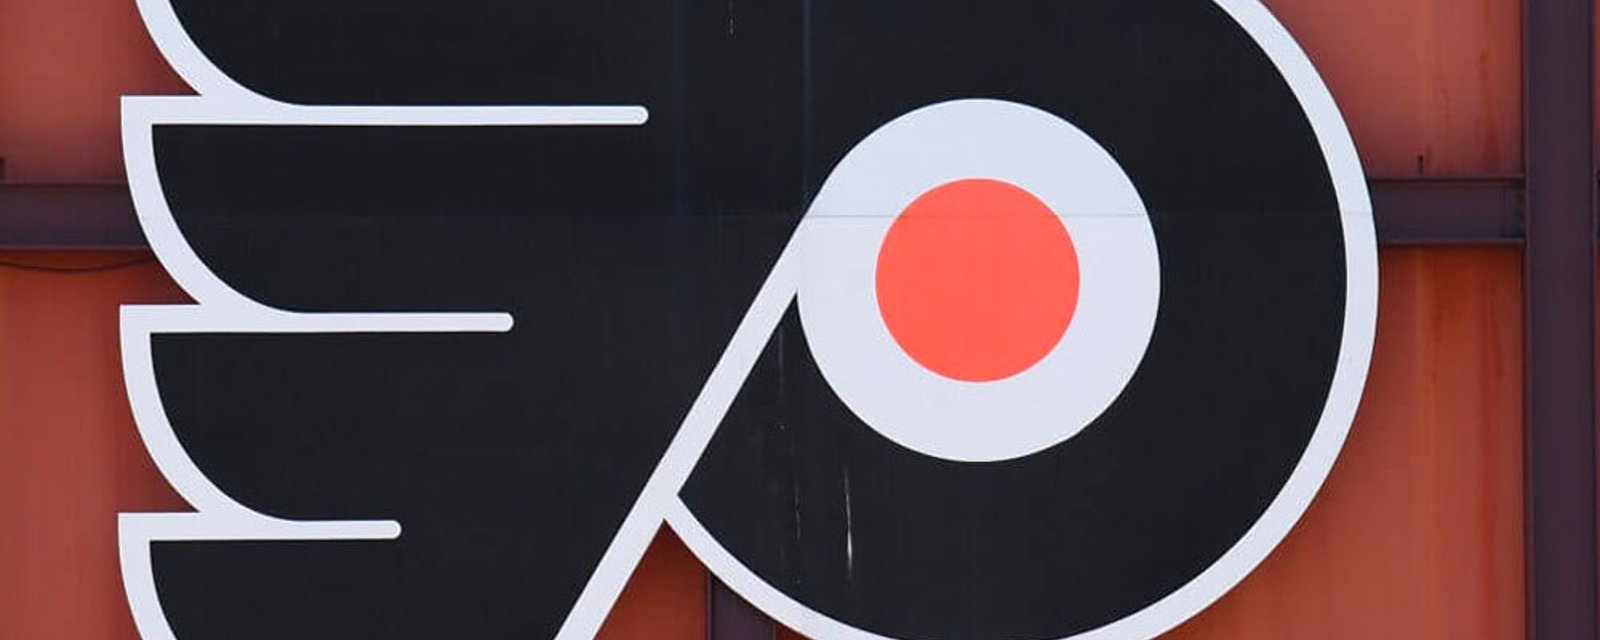 Briere hires another former Flyers player to join front office staff